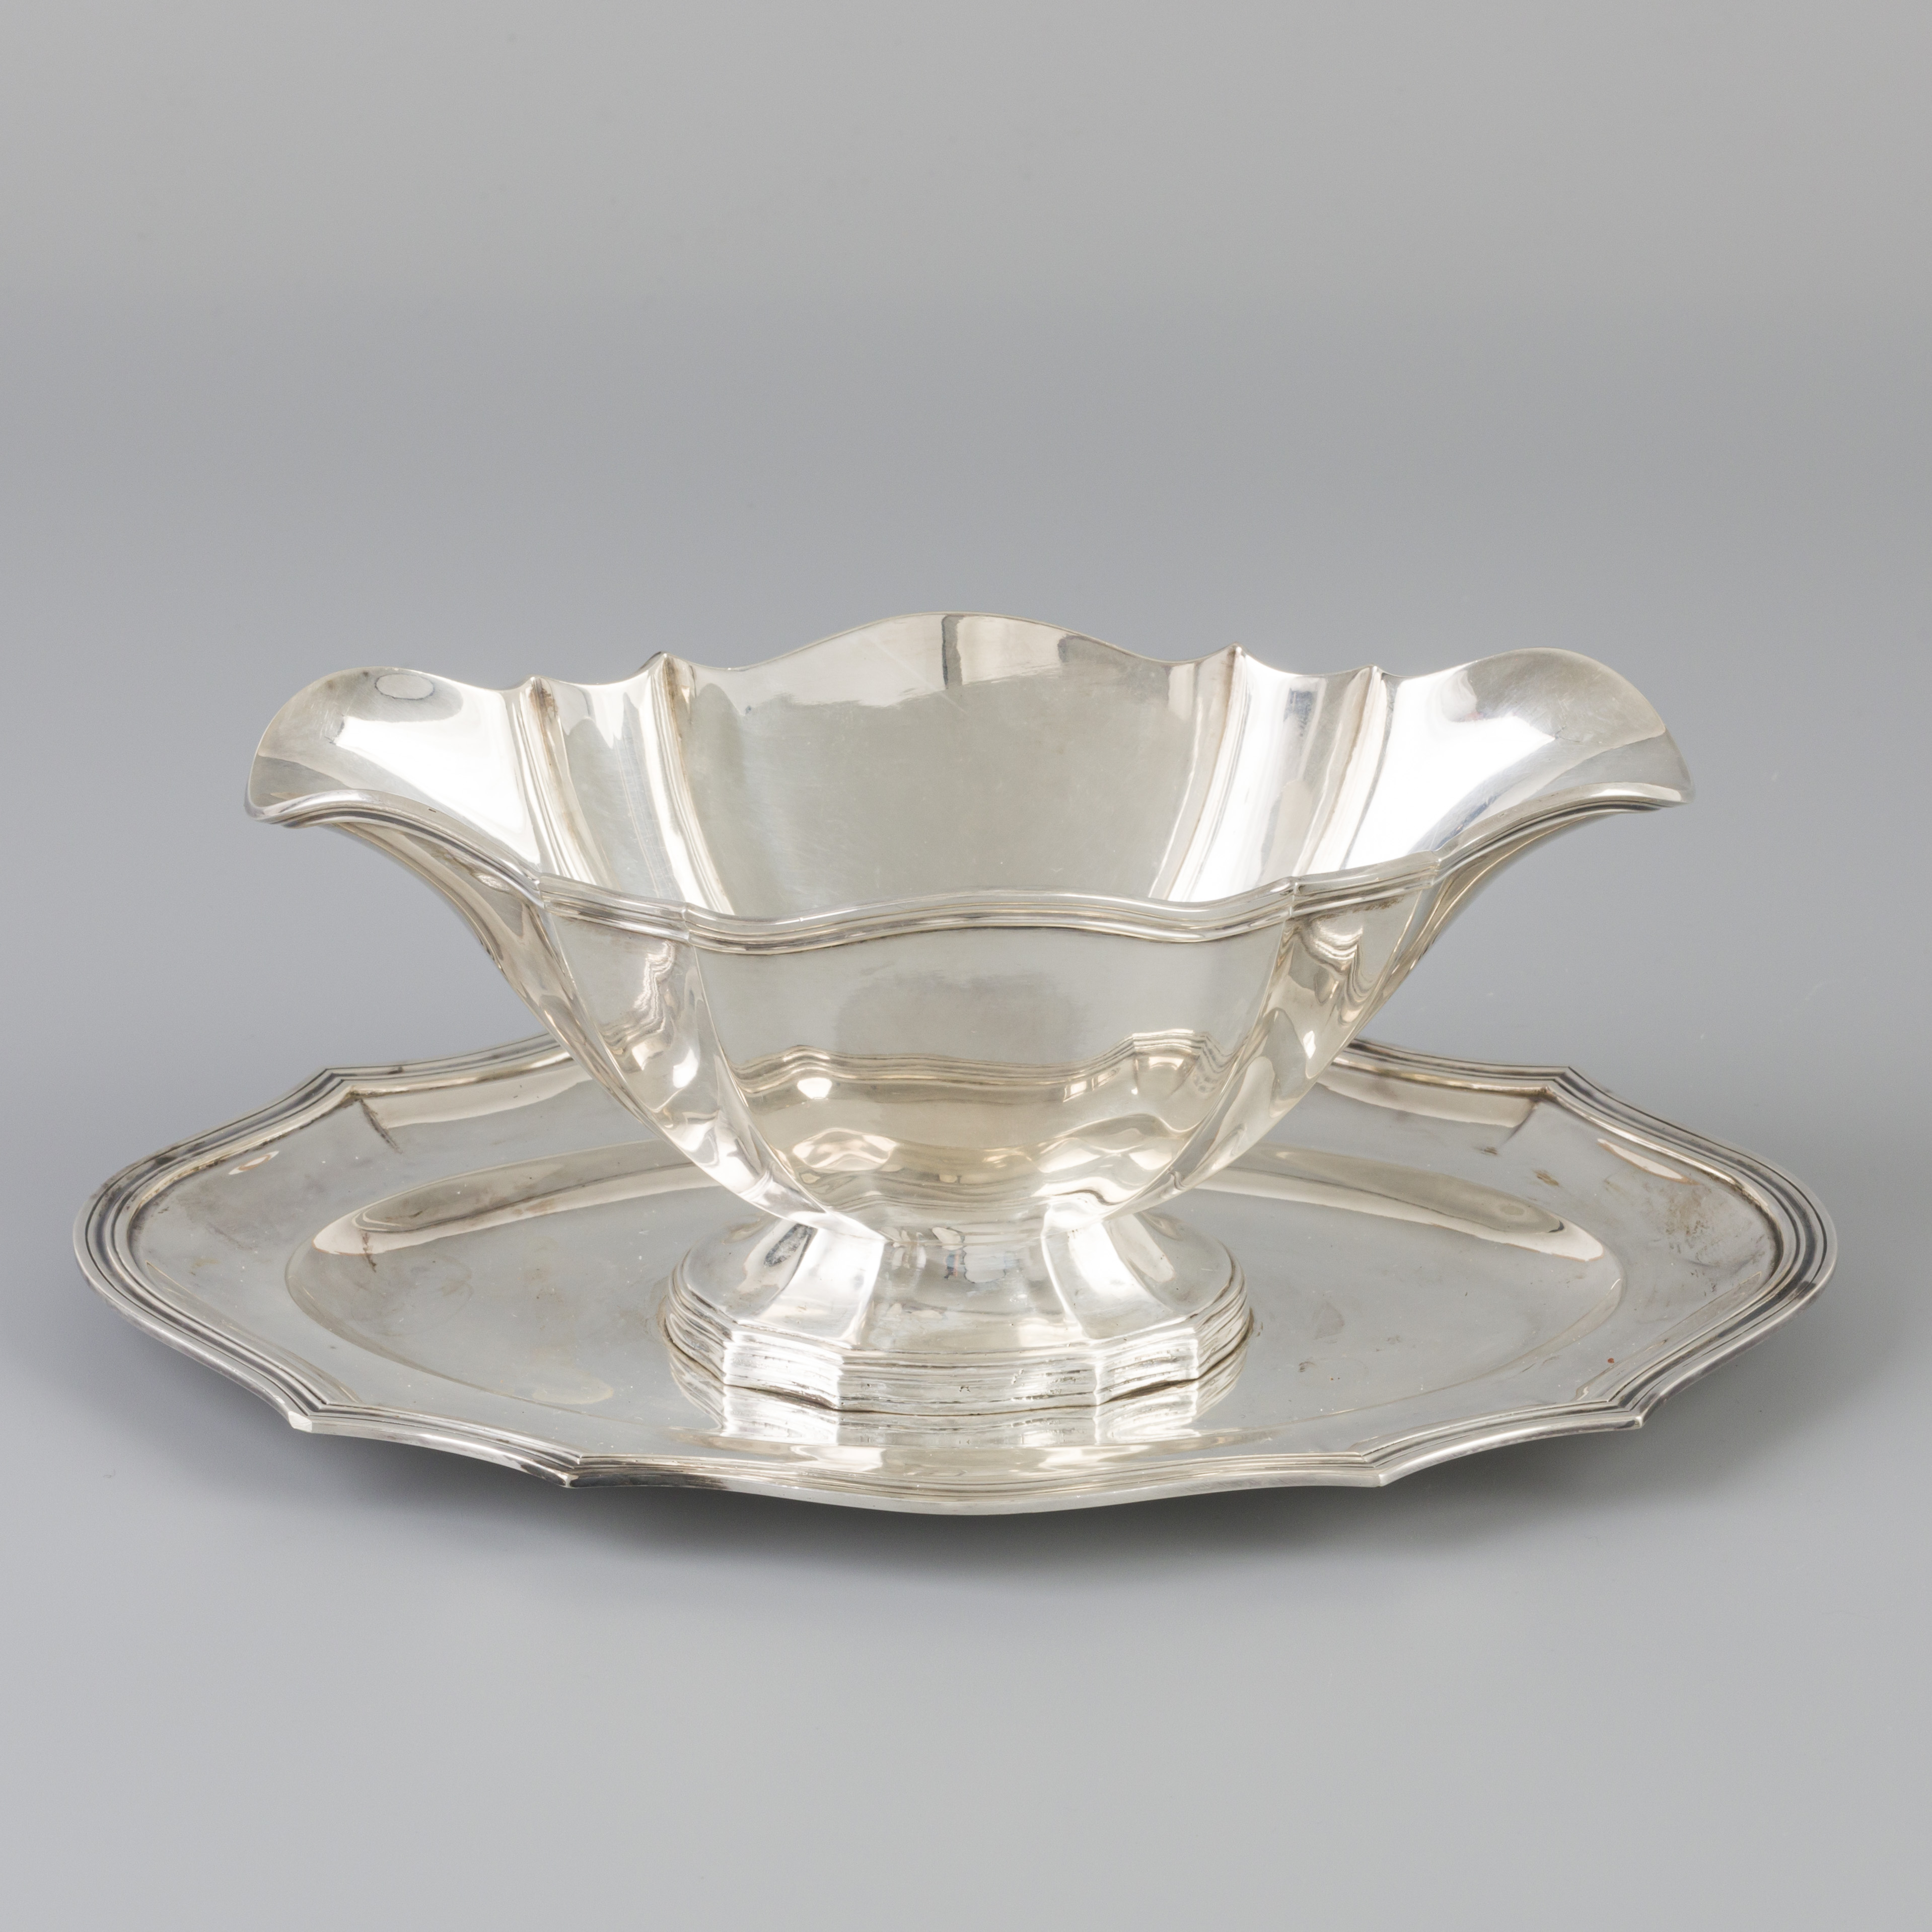 Sauce boat with silver saucer. - Image 3 of 5